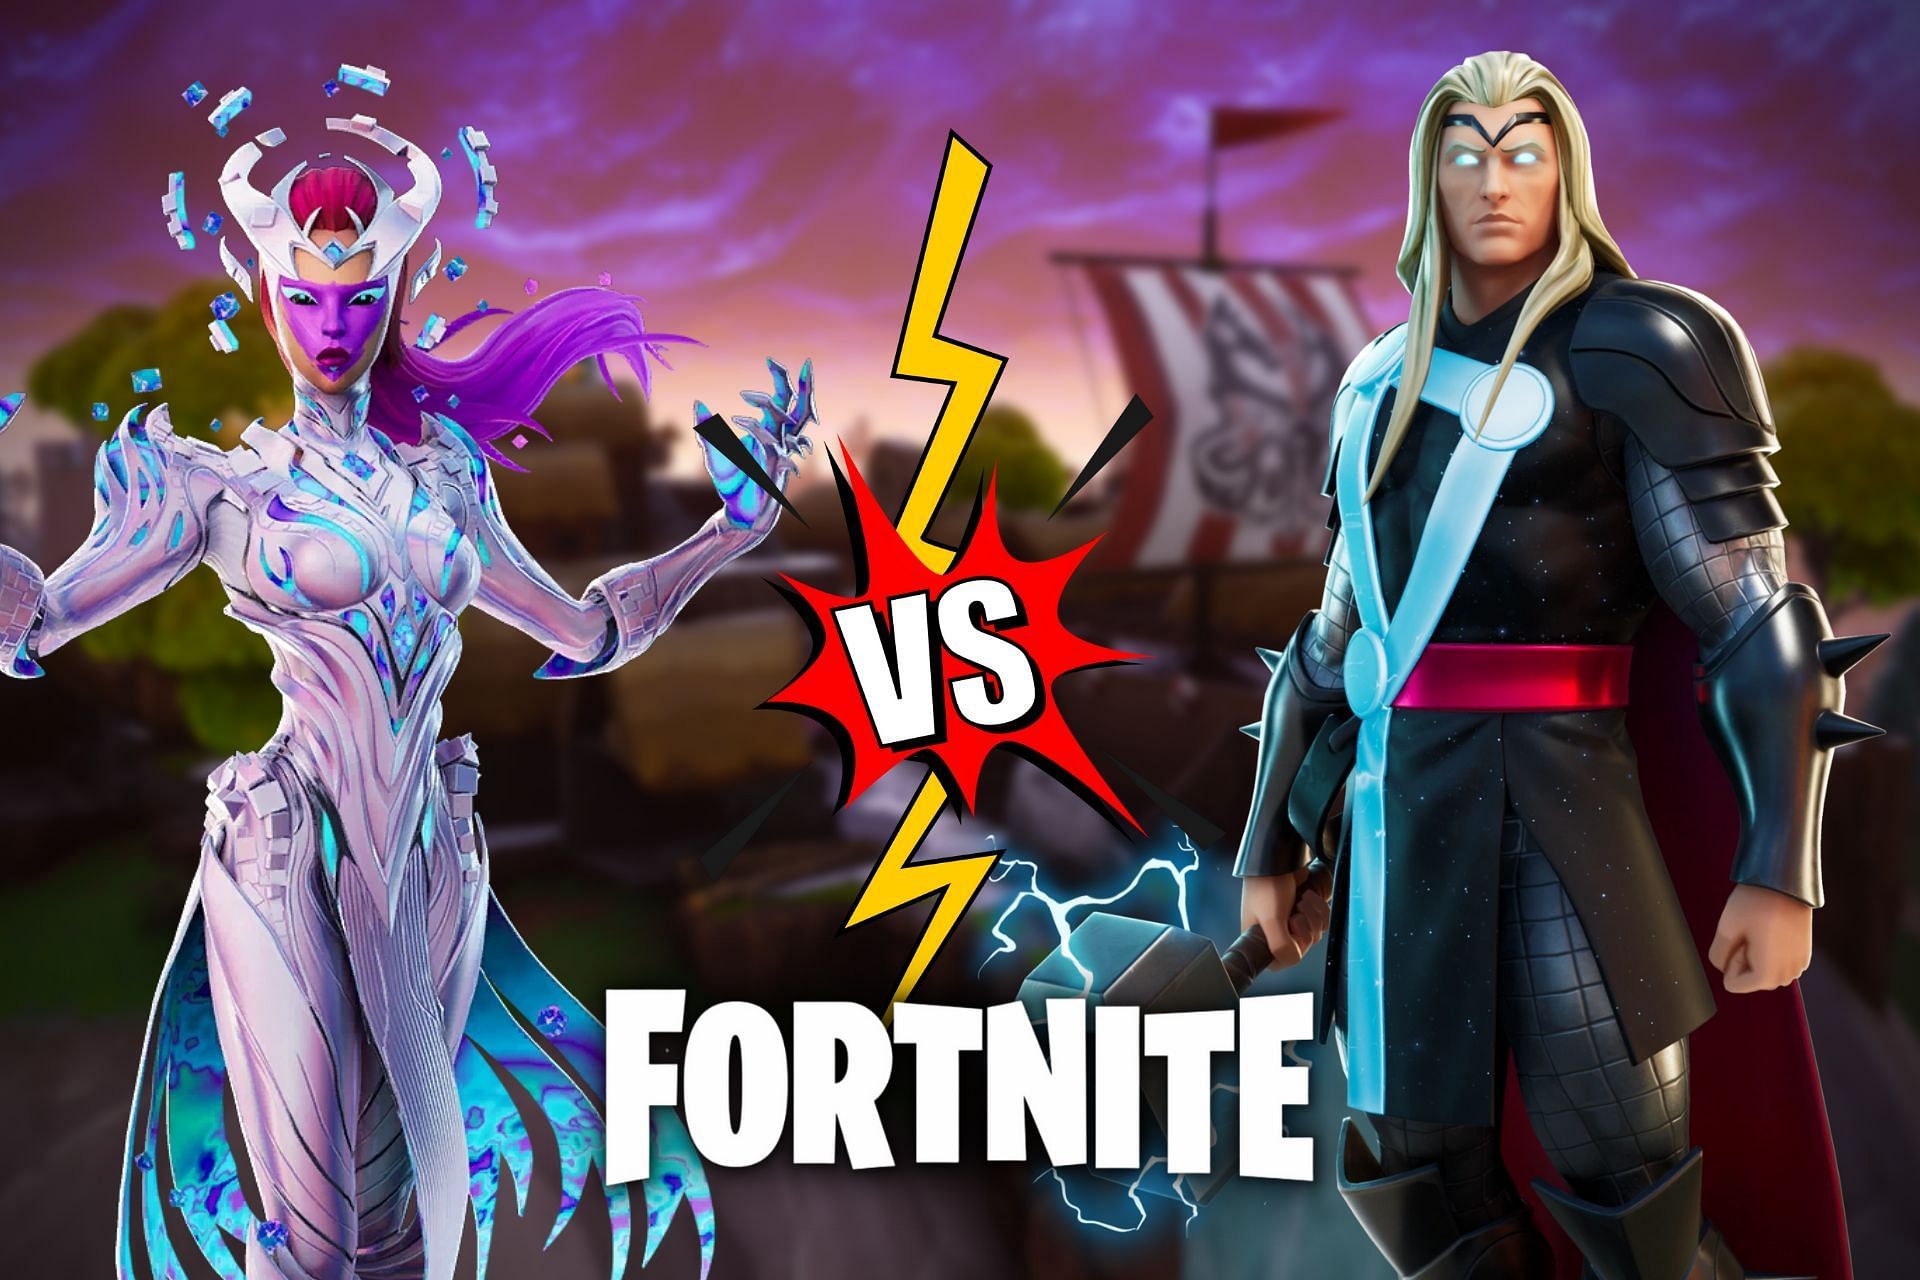 Fortnite Marvel characters who can defeat Cube Queen in a few seconds (Image via Sportskeeda)